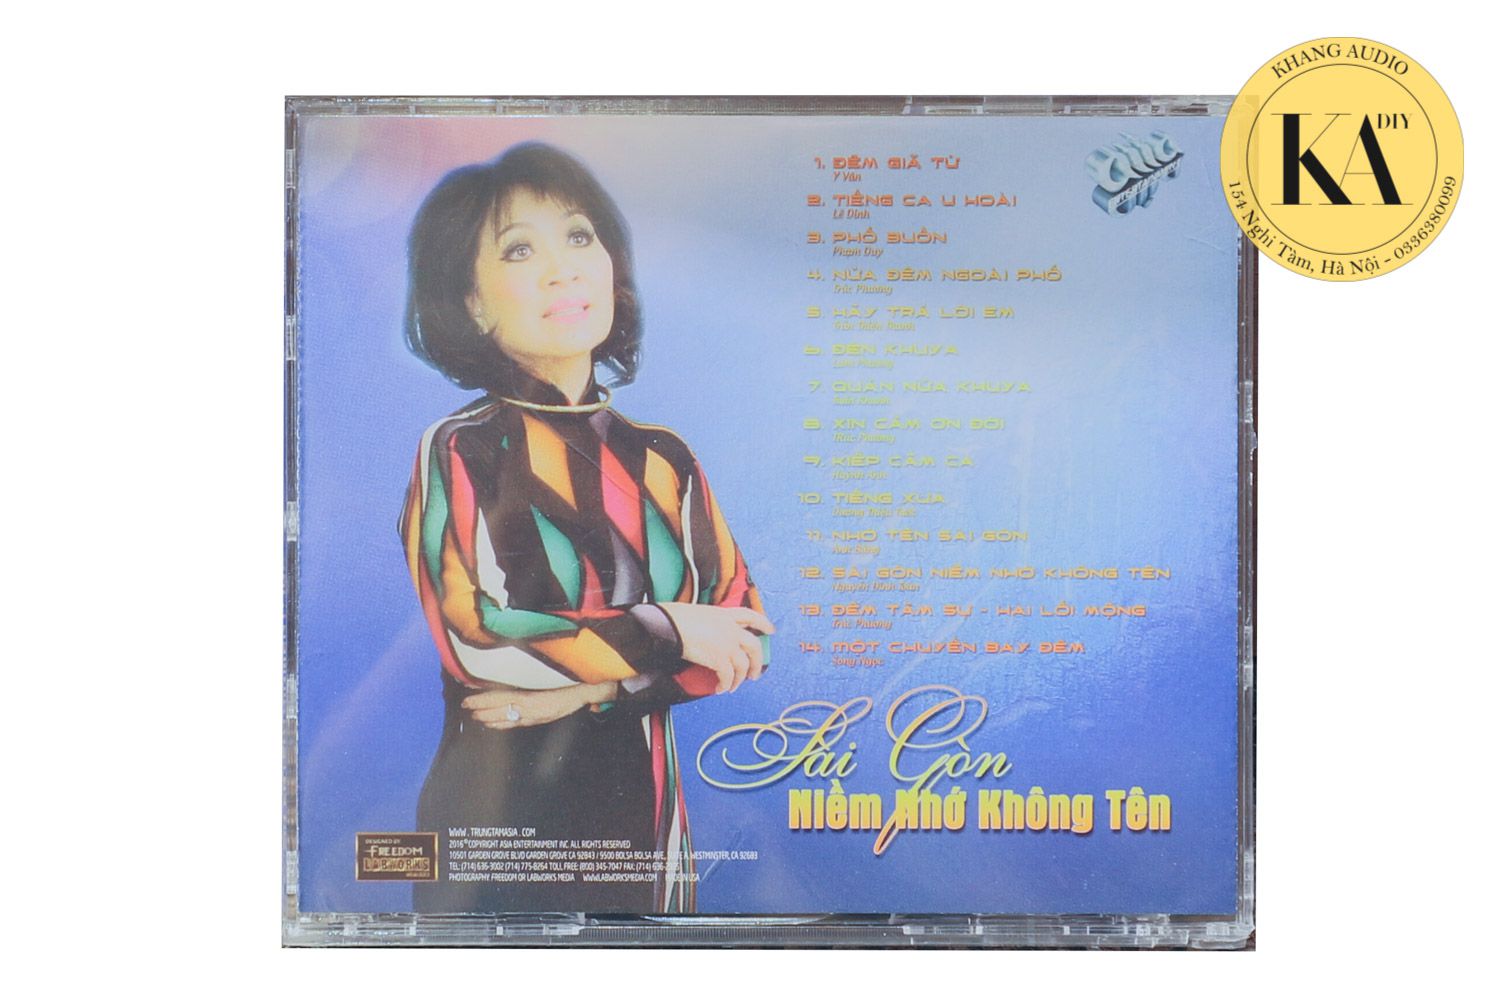 The Best Of Thanh Thúy Khang Audio 0336380099